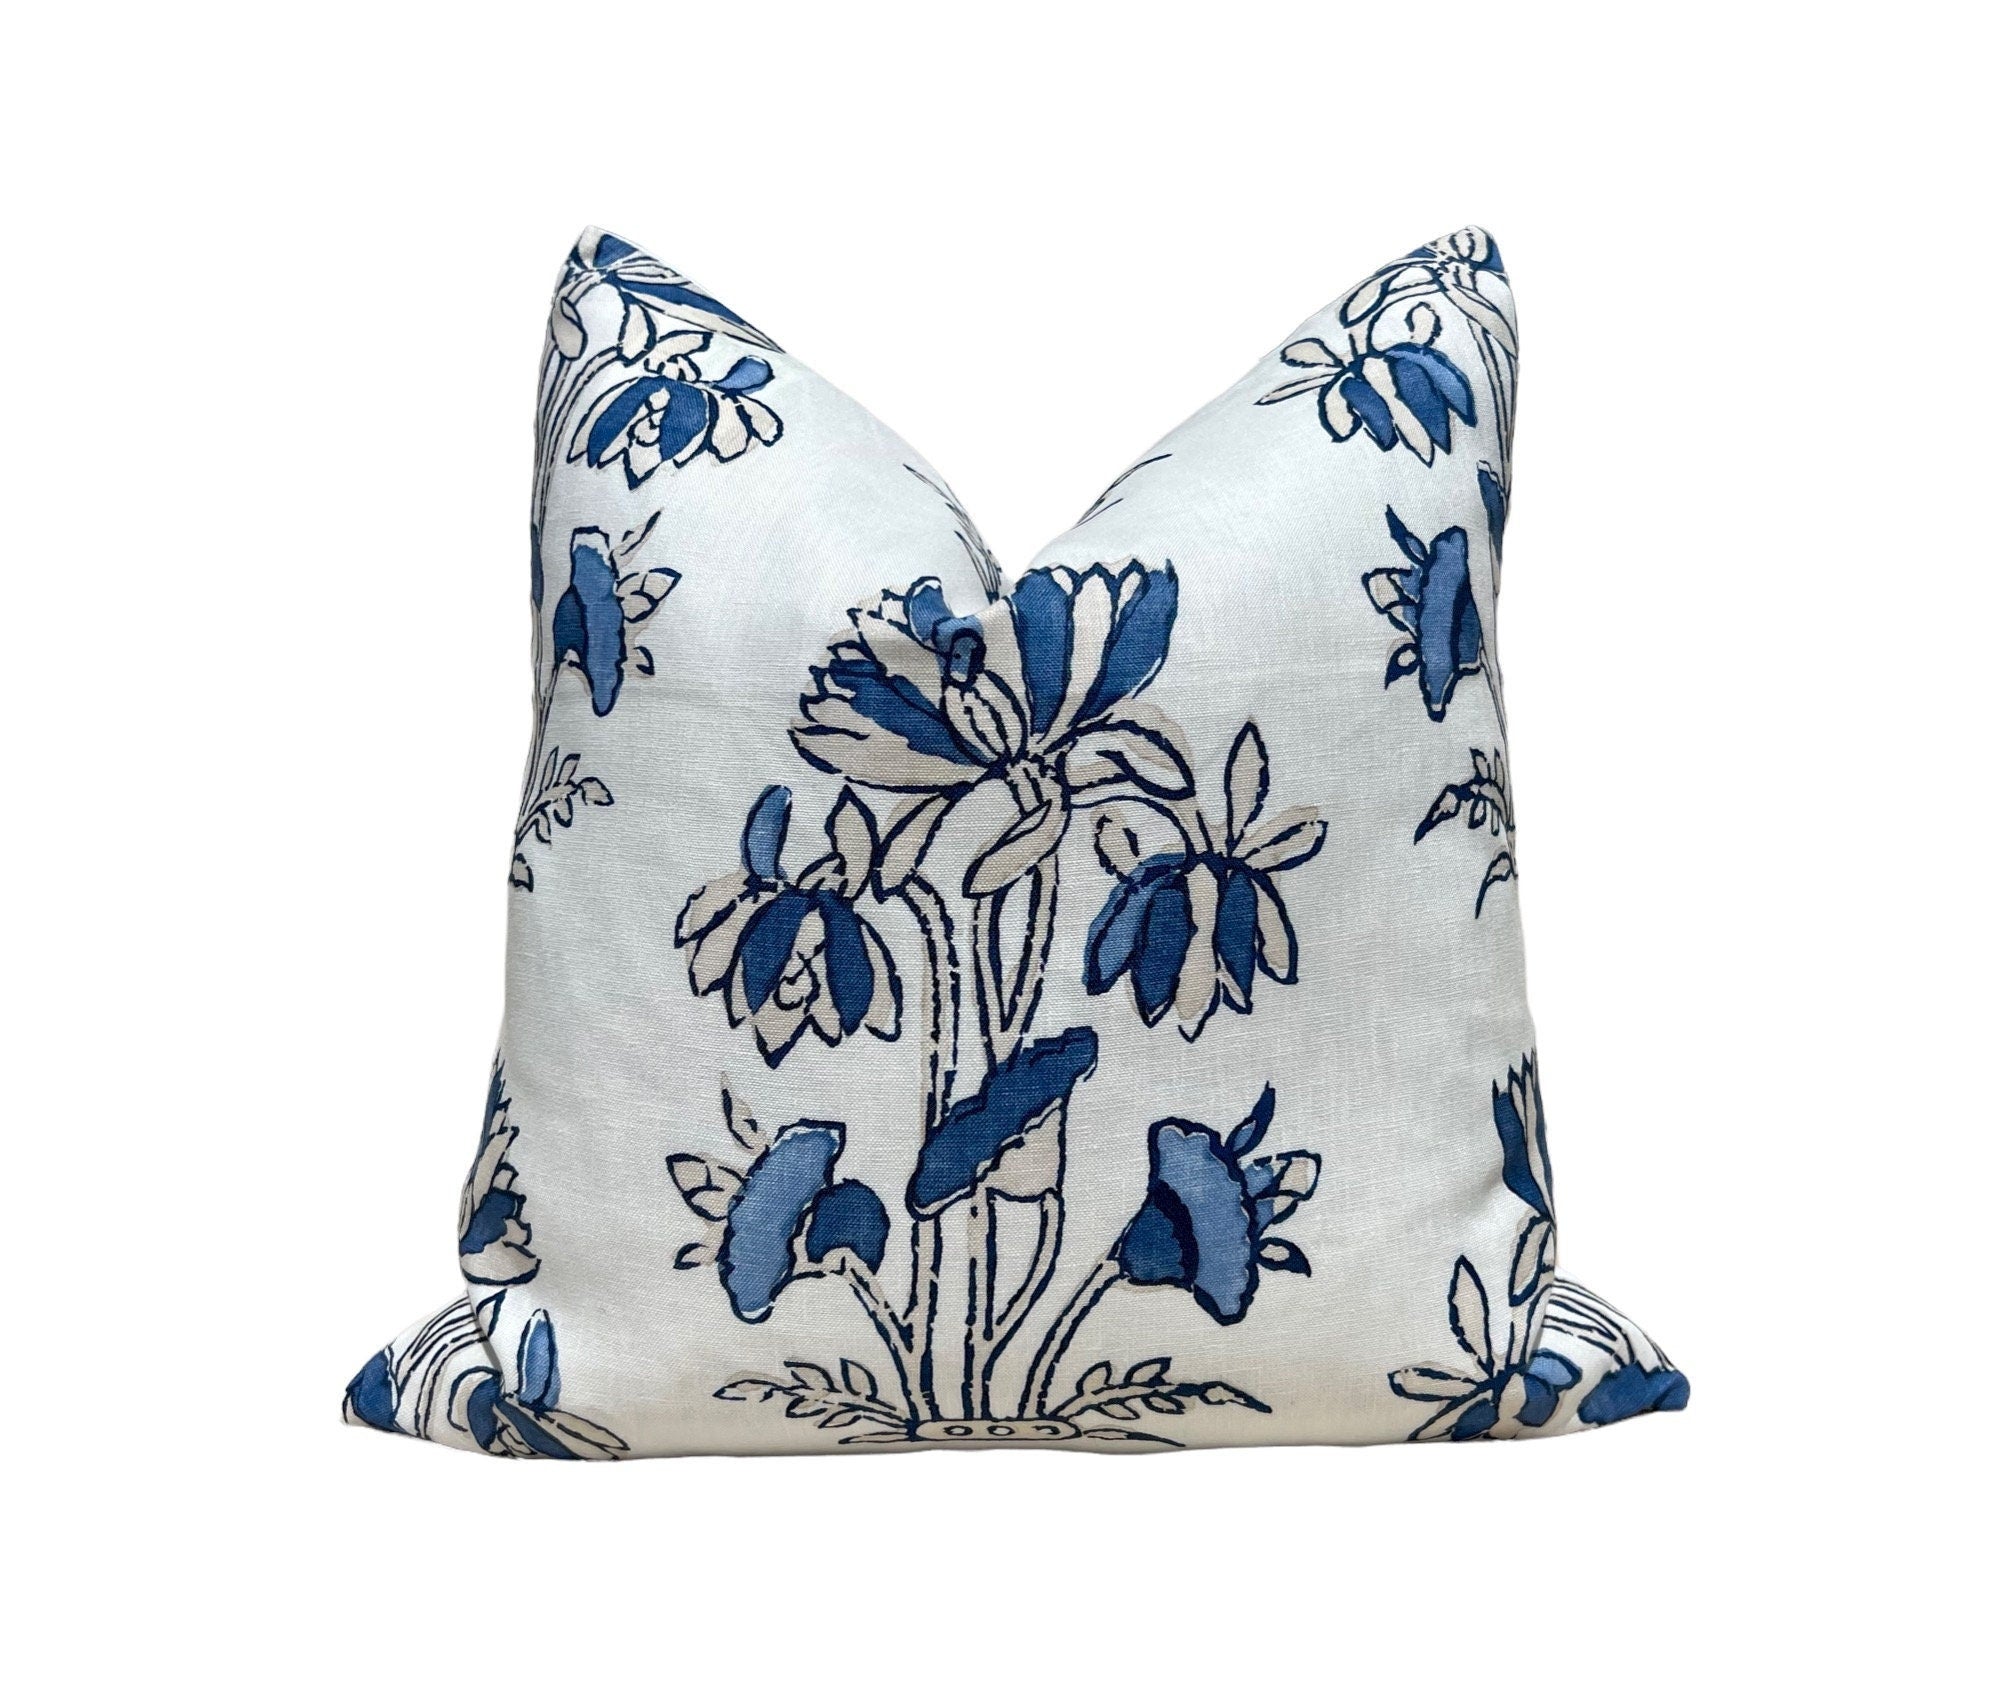 Thibaut Lily Flower Pillow in Blue and White. Designer Pillows, Accent Floral Pillow in Blue,  Euro Sham Cushion Cover, High End Pillows